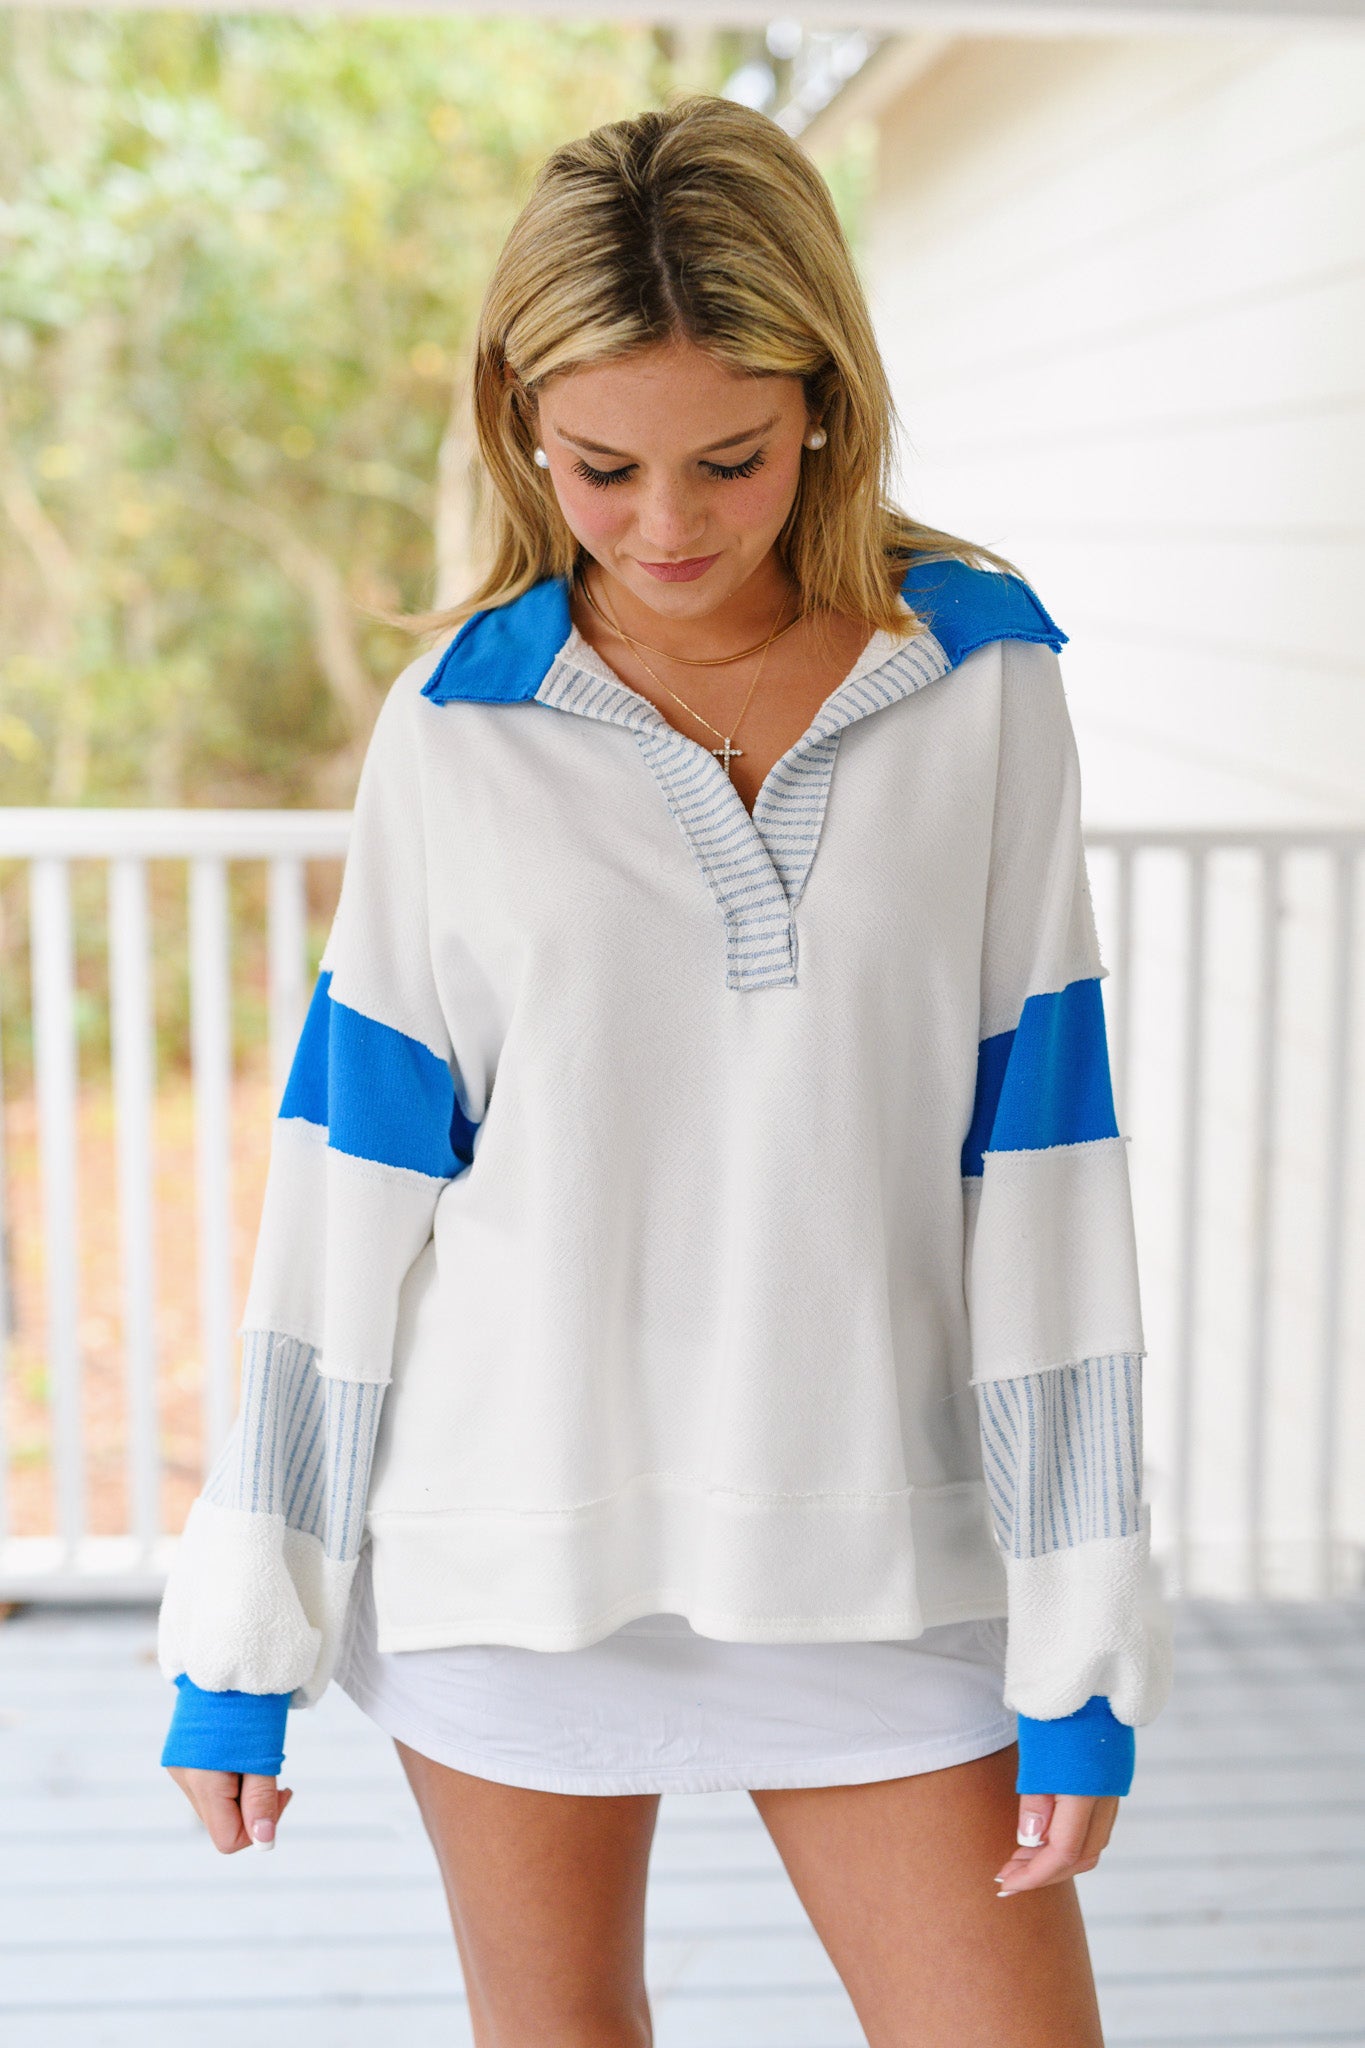 Gracelynn French Terry Knit Tunic Top - Ivory/Blue